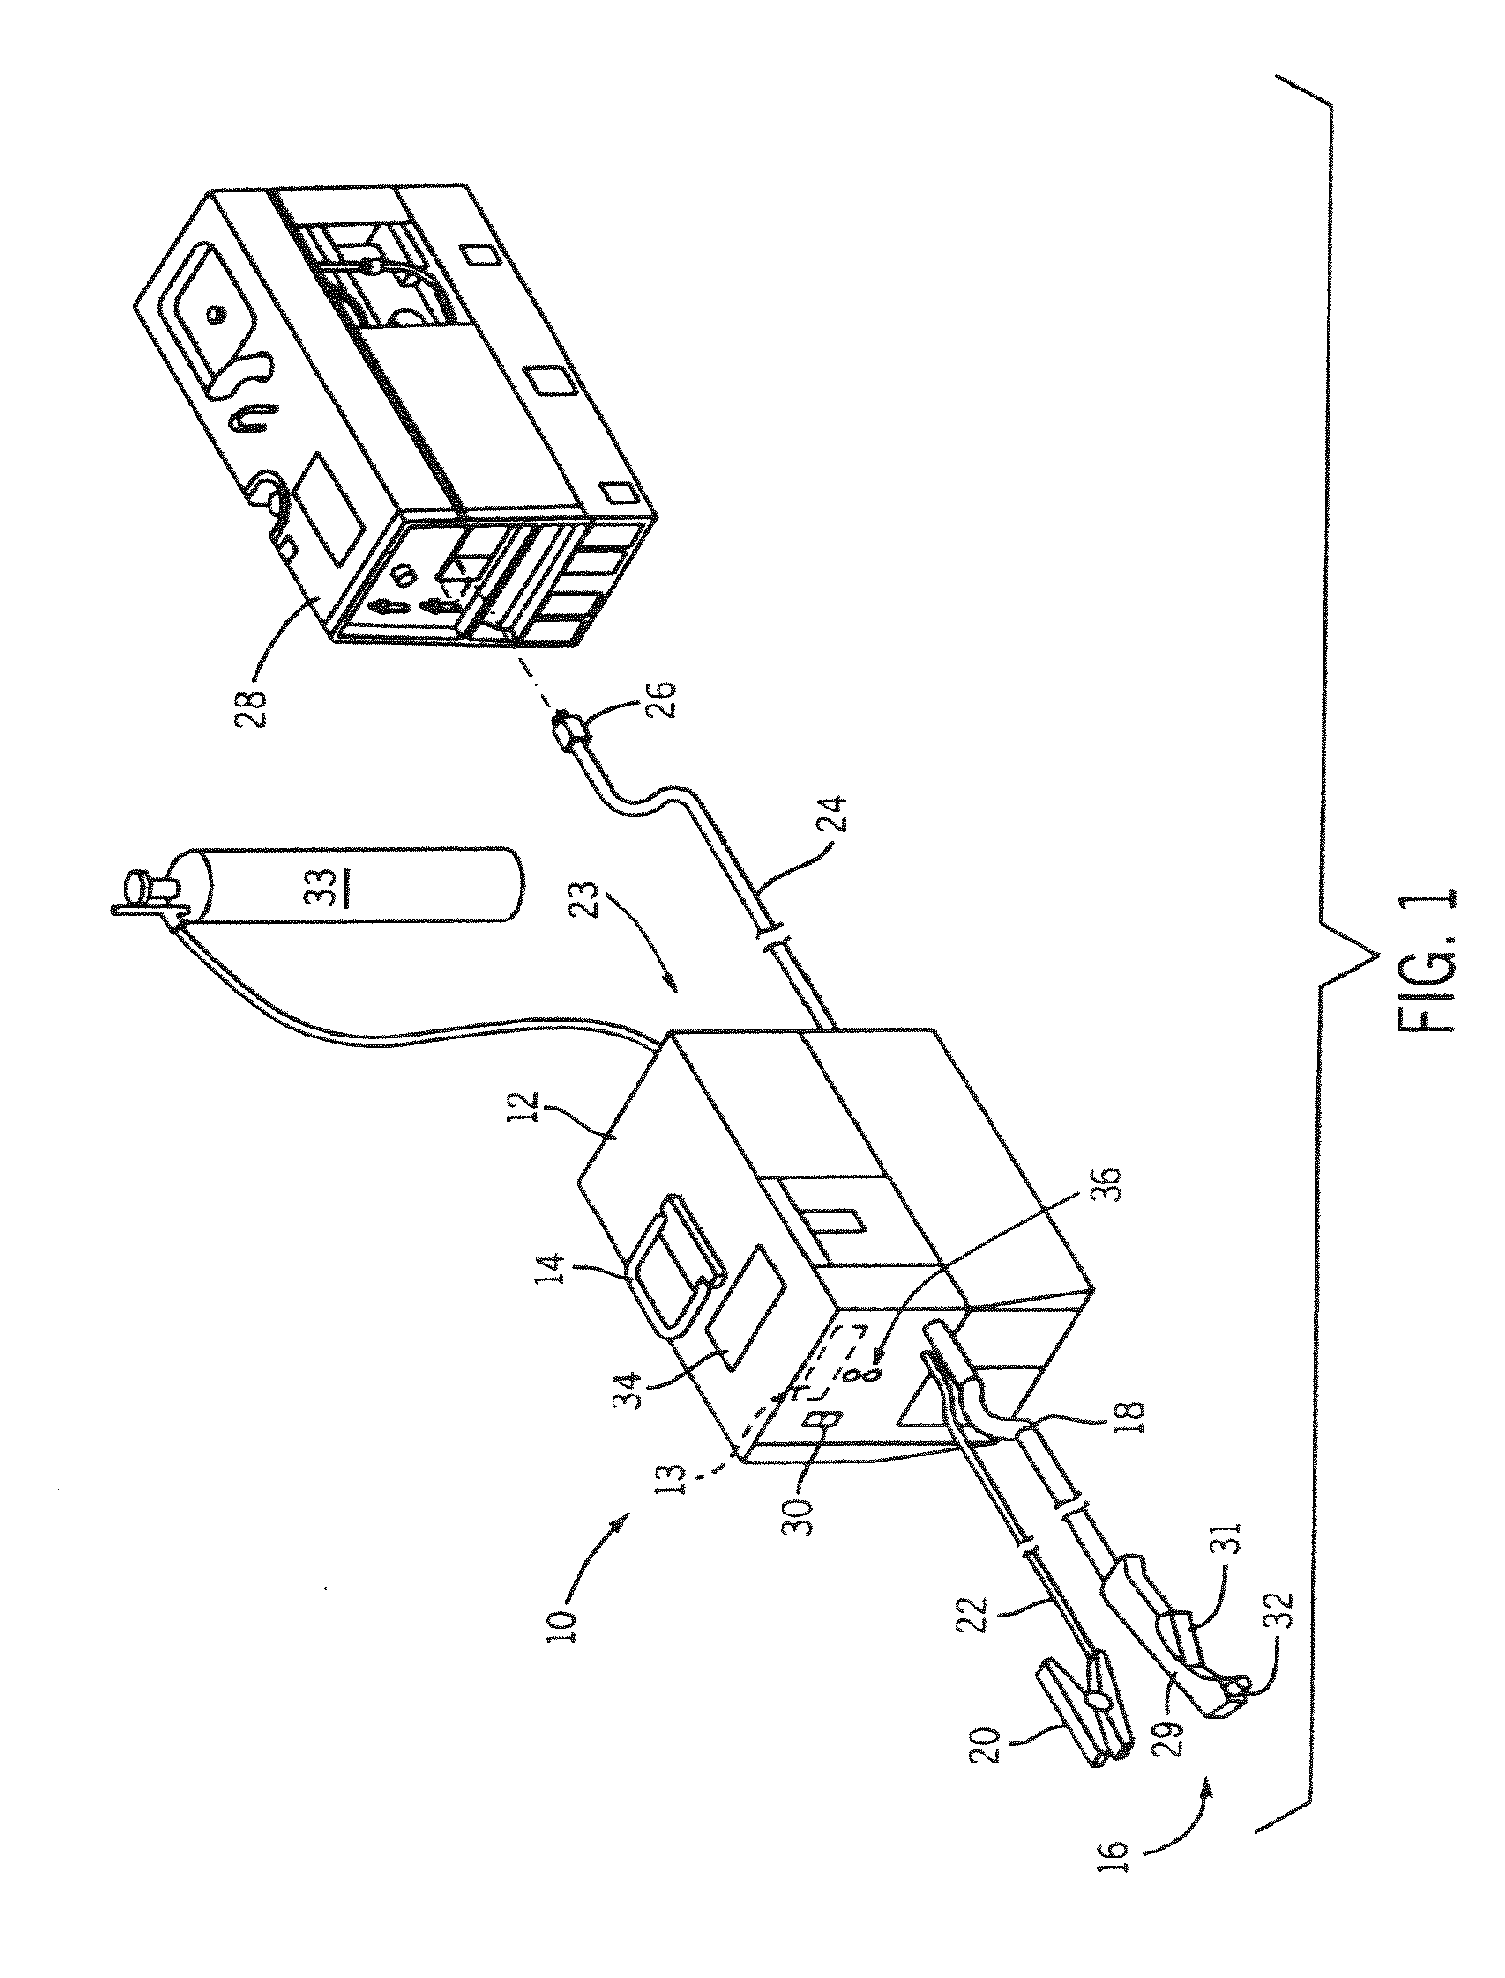 Method and System of Conserving Plasma Torch Consumable